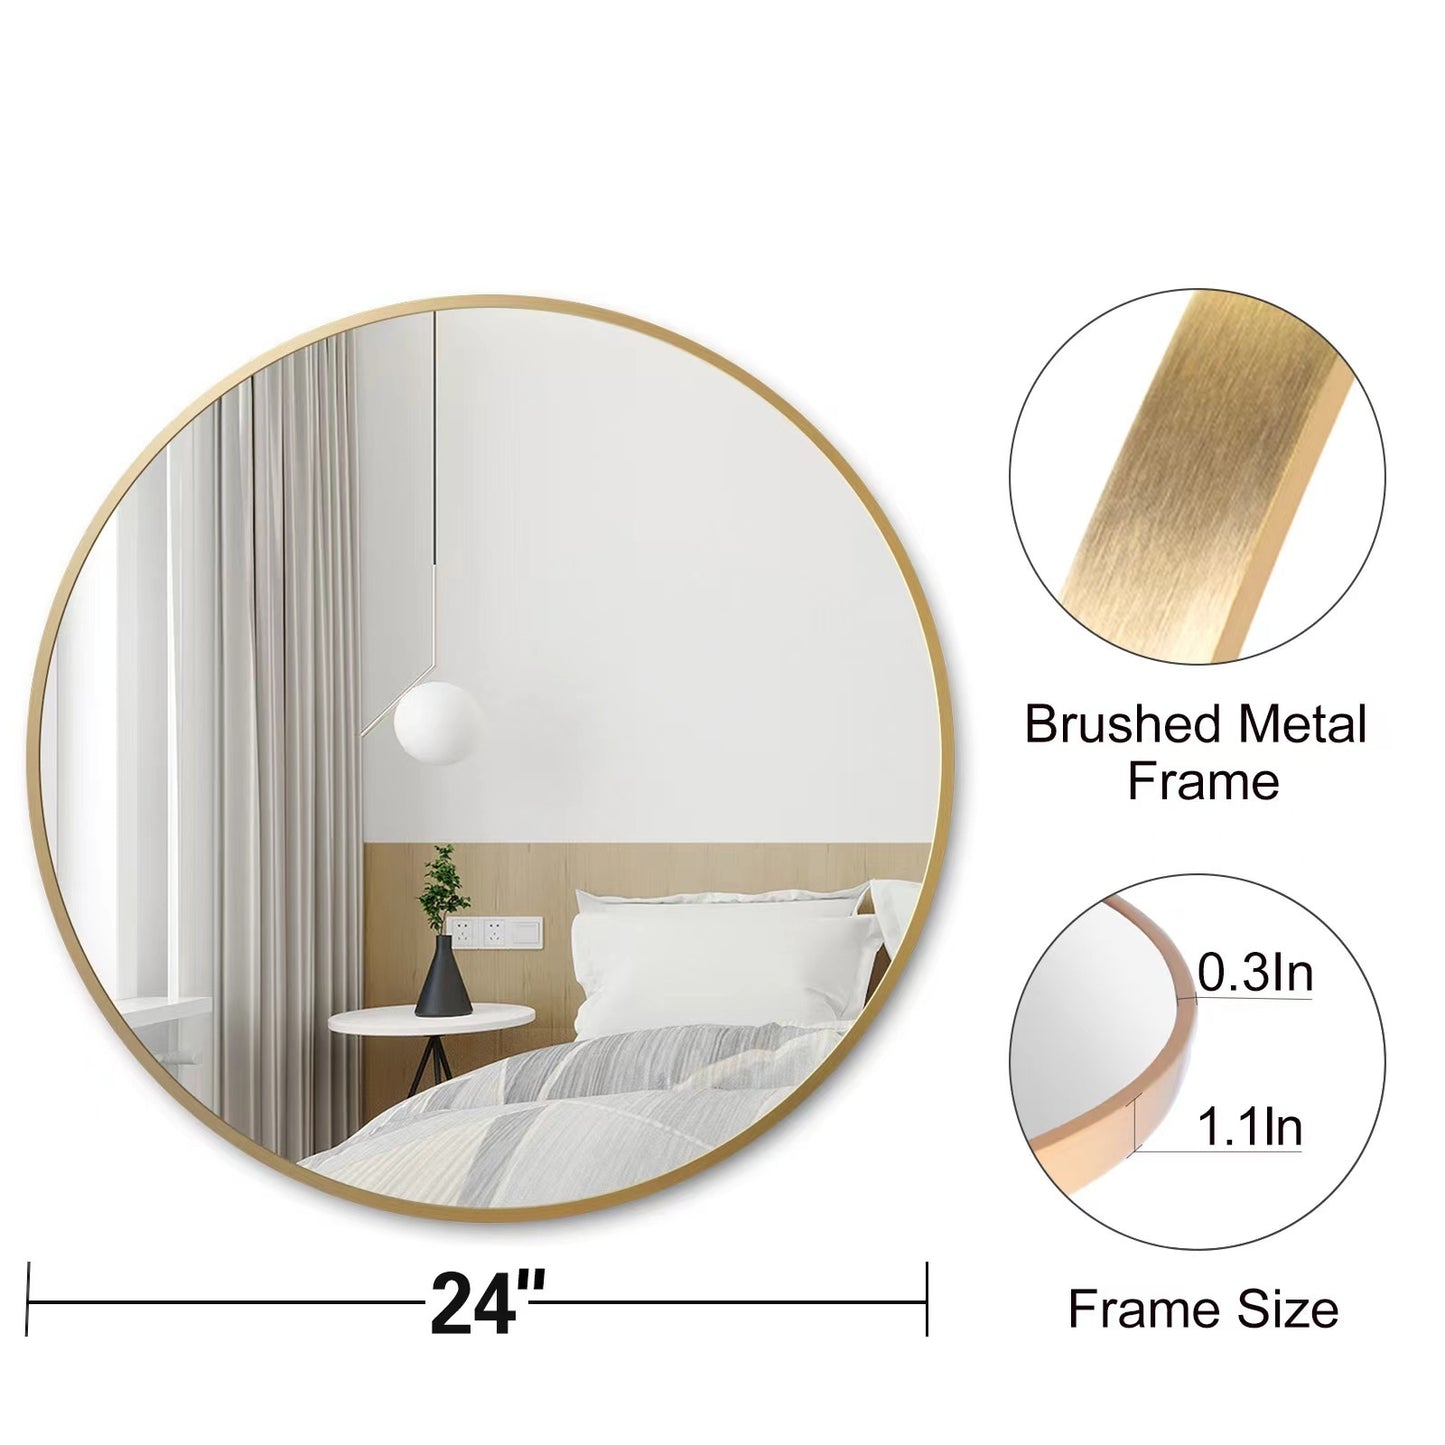 Circle Mirror 24 Inch, Gold Round Wall Mirror Suitable for Bedroom, Living Room, Bathroom, Entryway Wall Decor and More, Brushed Aluminum Frame Large Circle Mirrors for Wall